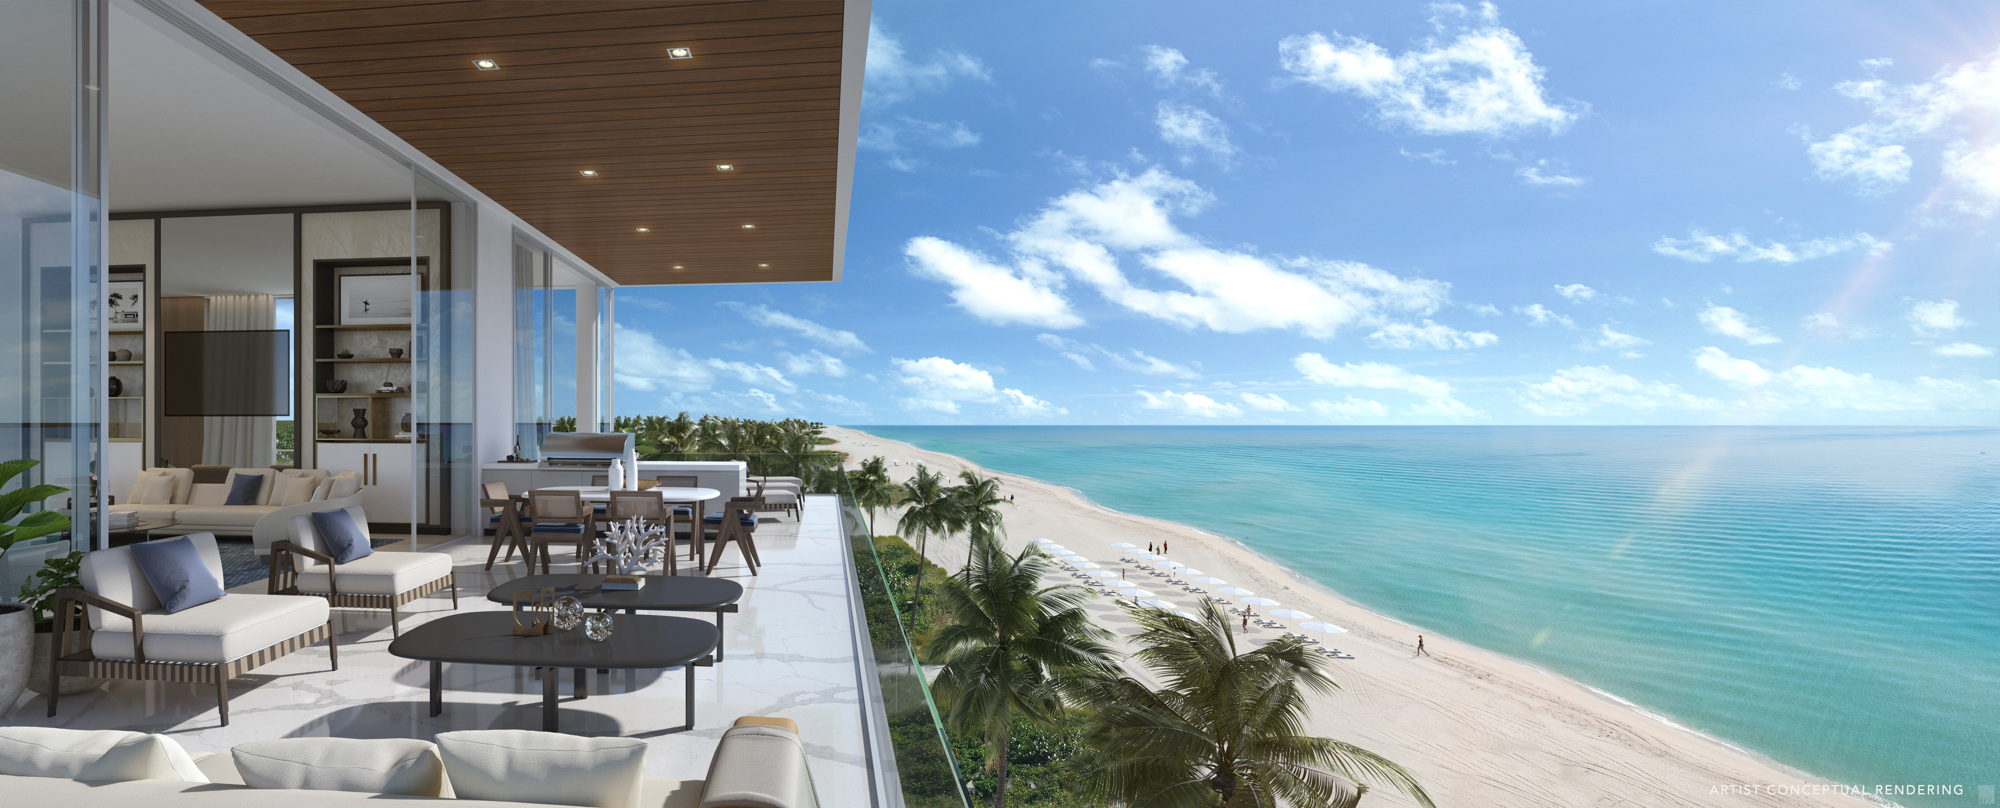 Here is a rendering of the proposed Sage Longboat Key condominium development at 4651 Gulf of Mexico Drive.